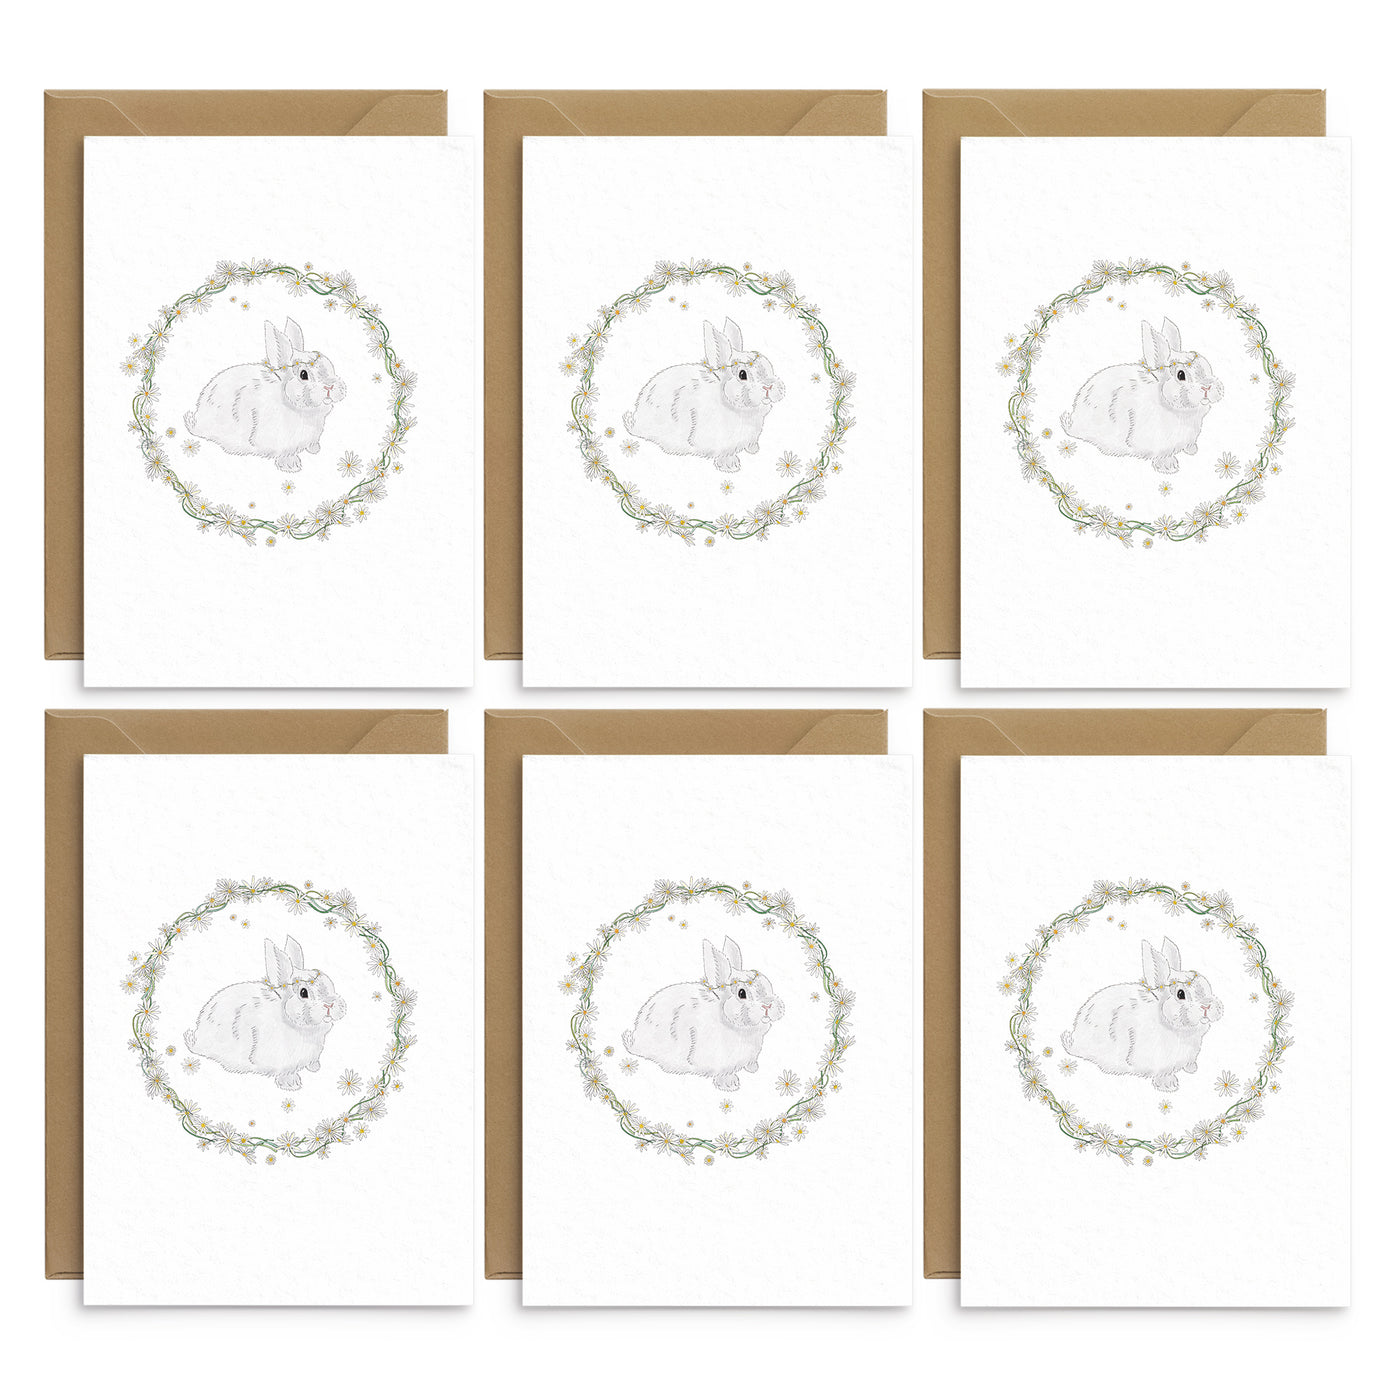 A set of 6 spring themed greetings cards featuring a white bunny wearing a daisy crown pictured inside a rather made of daisies and greenery. No text. Photo shows 6 cards laid out on top of recycled brown envelopes. Easter greetings cards by Poppins and co.